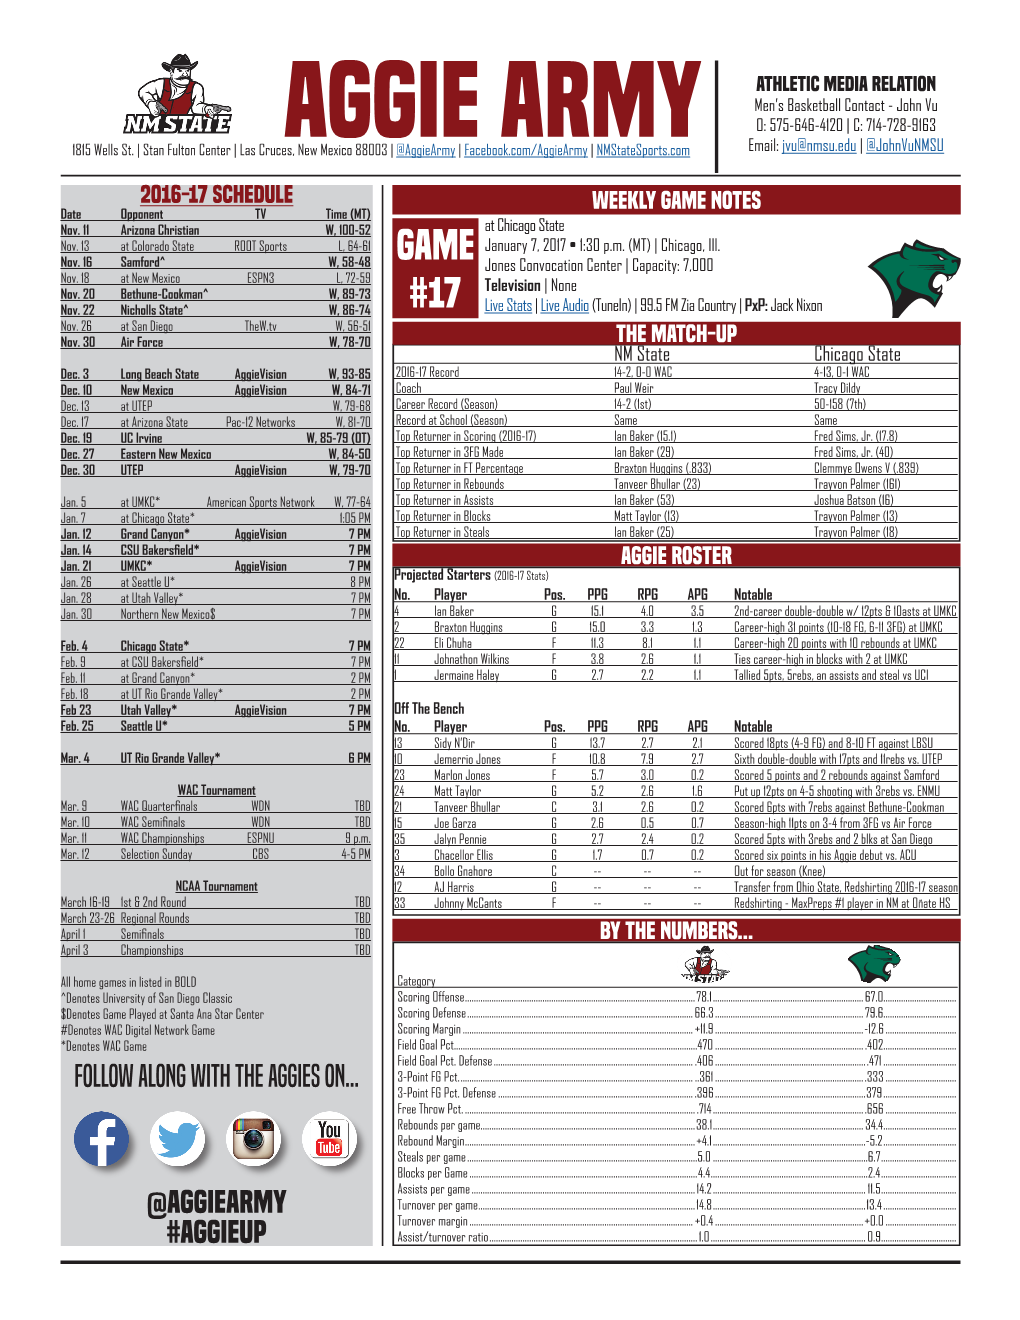 Aggie Army Game Notes Game Notes #17 - at Chicago State